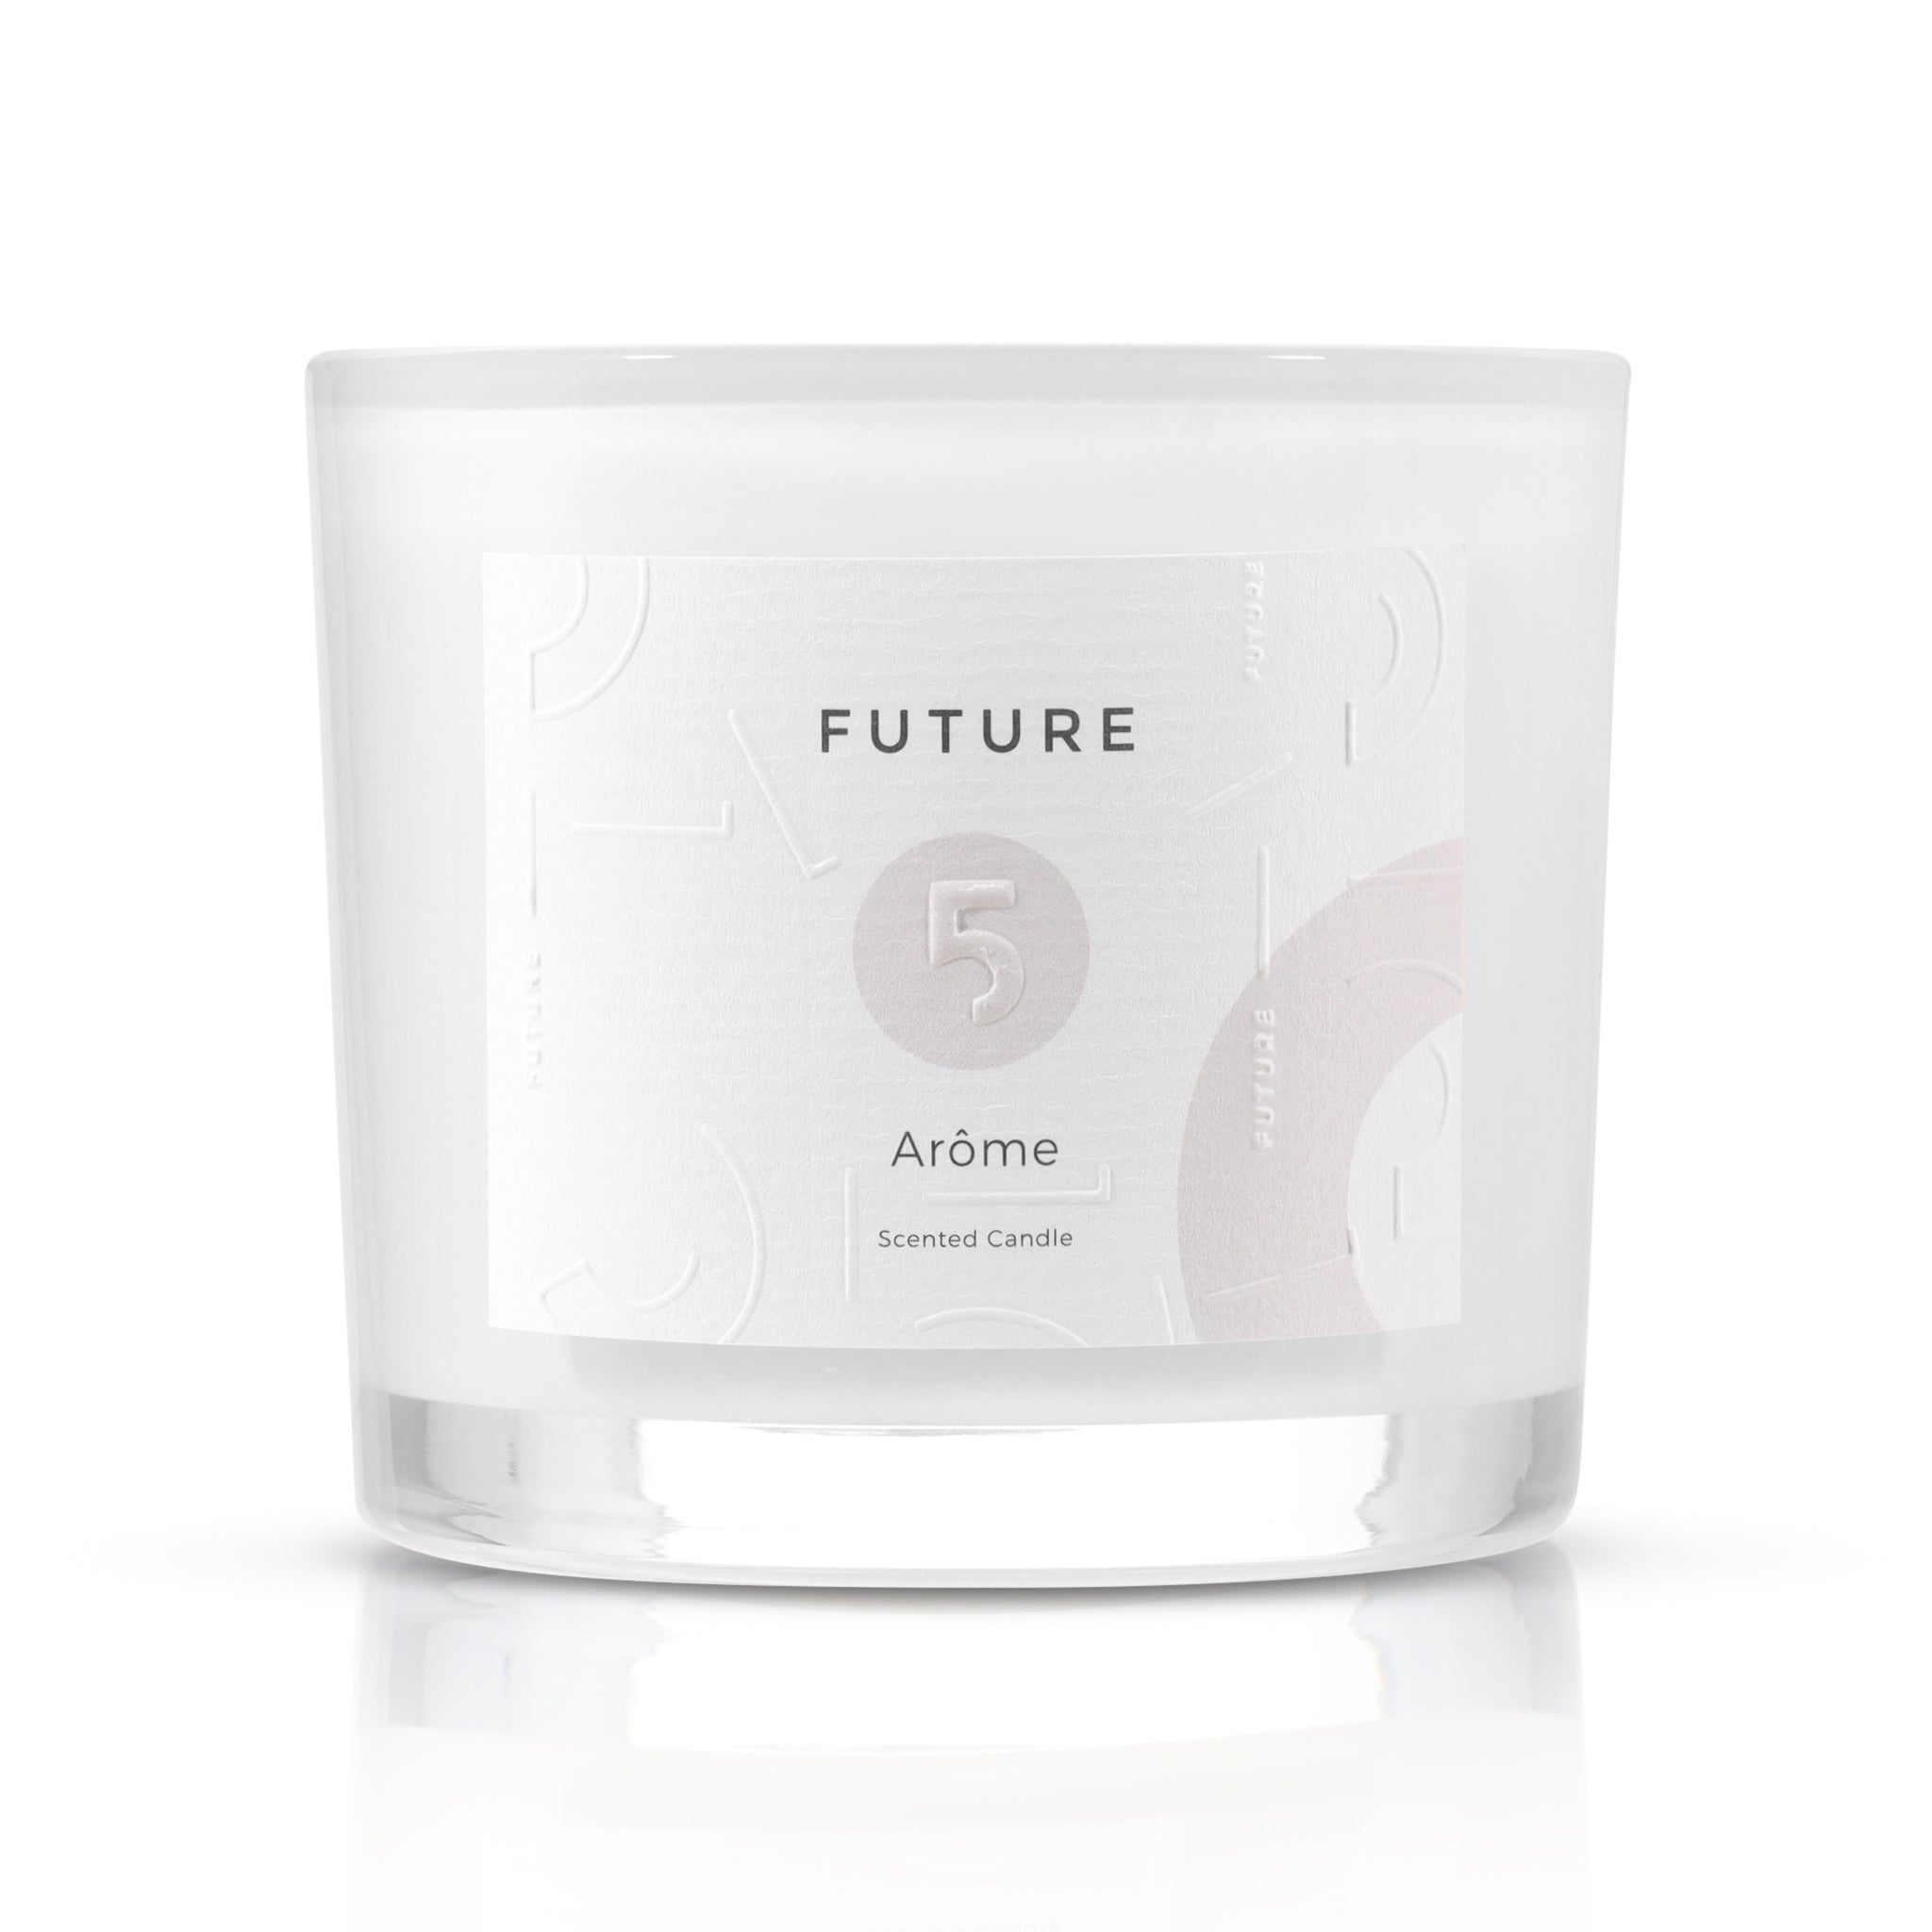 Arôme Candle - Wholesale - Future Cosmetics The 5 Elements